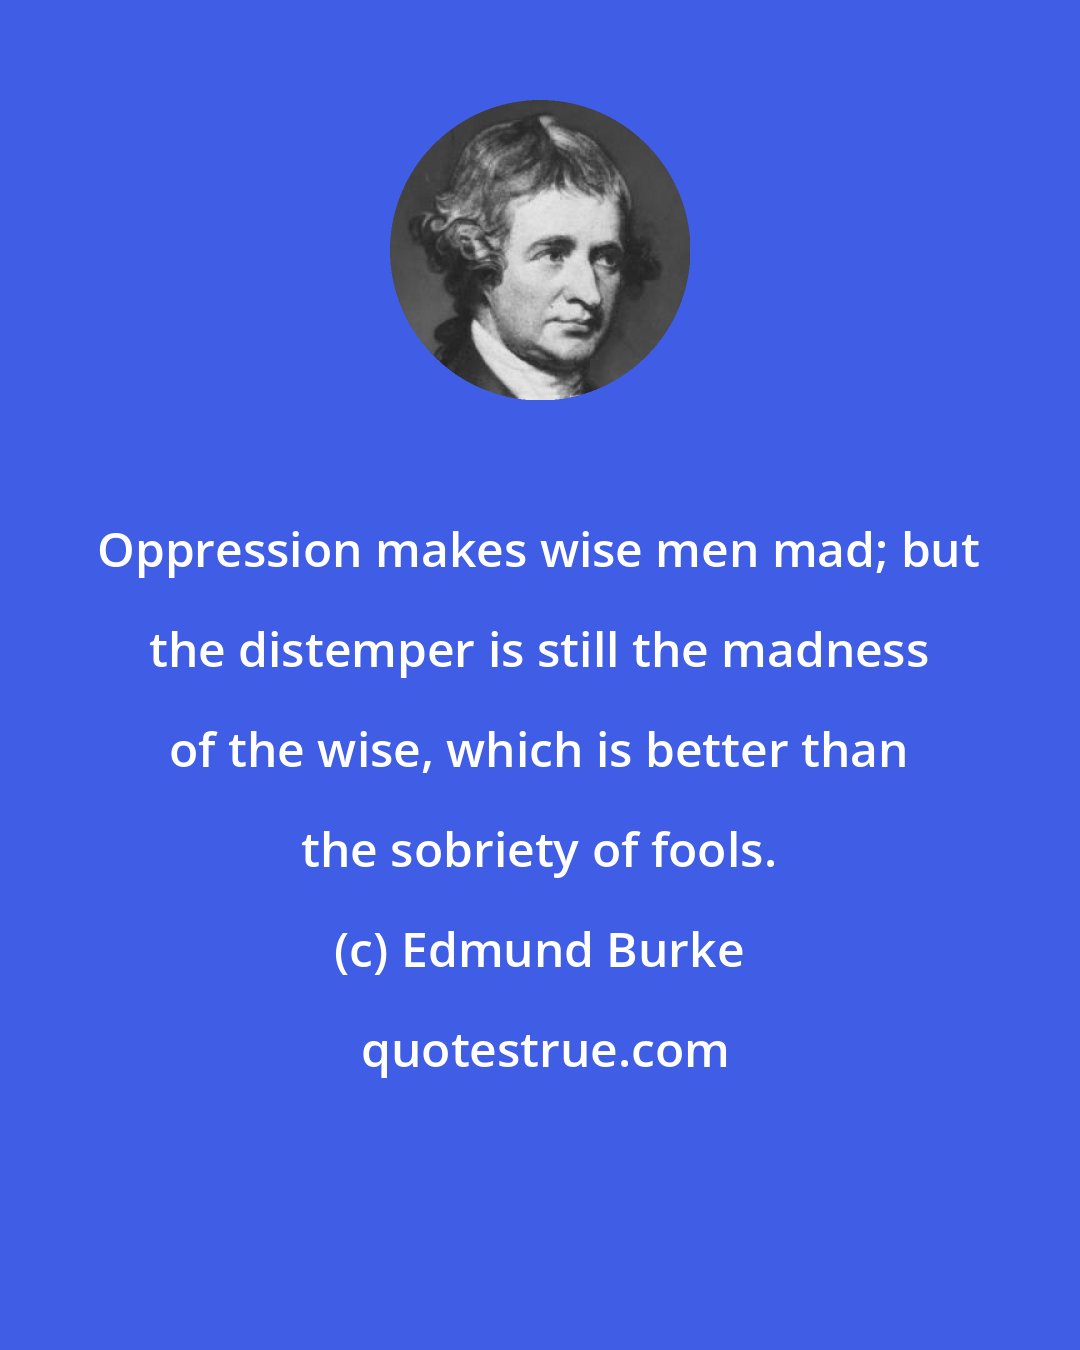 Edmund Burke: Oppression makes wise men mad; but the distemper is still the madness of the wise, which is better than the sobriety of fools.